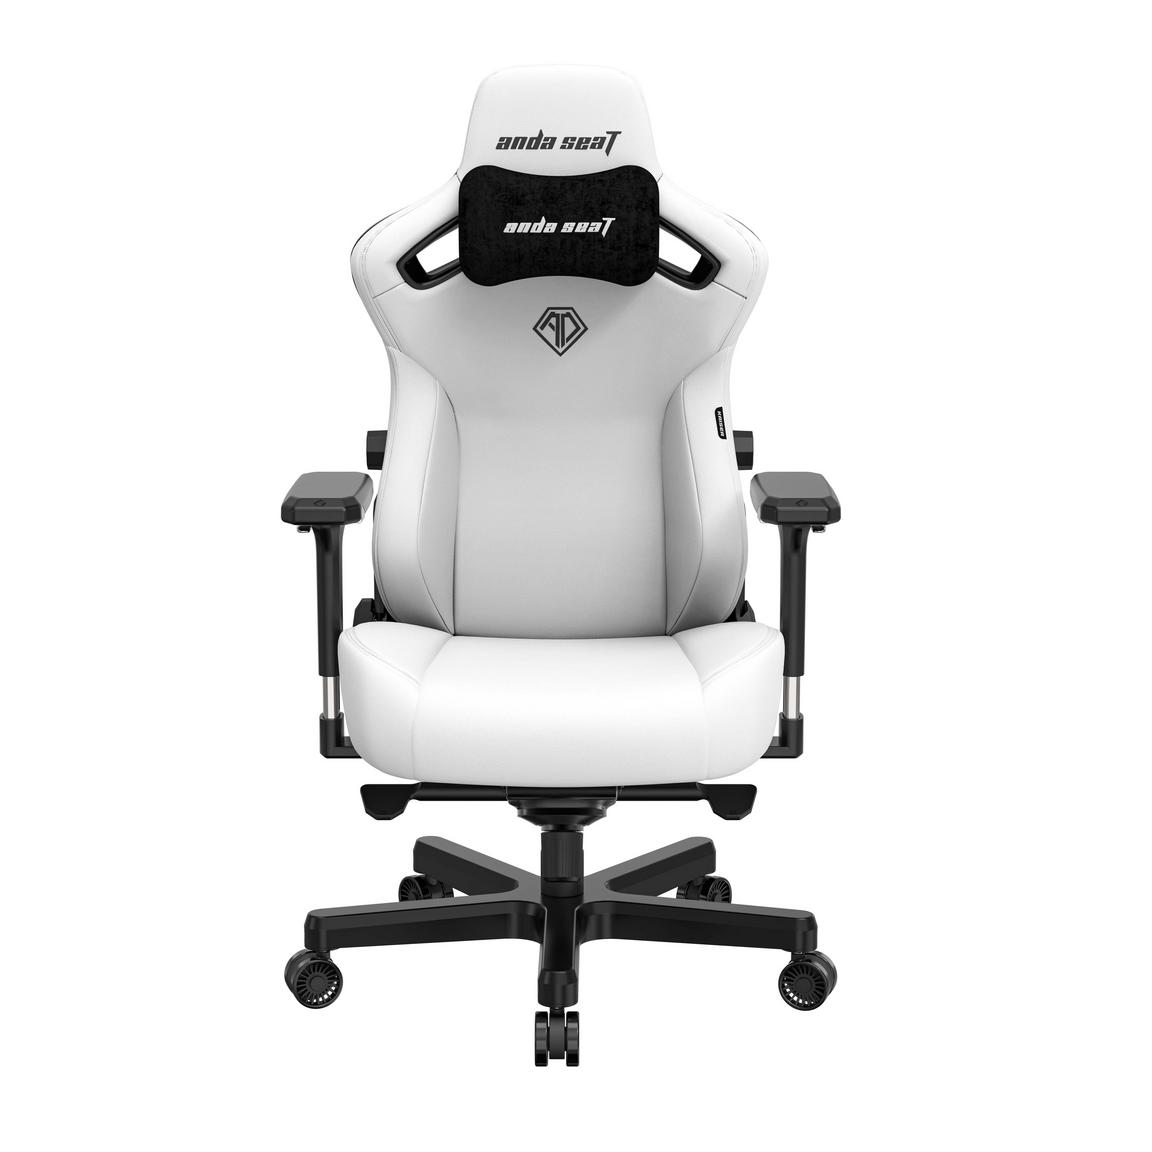 AndaSeat Kaiser 3 XL Gaming Chair - White PVC Leather